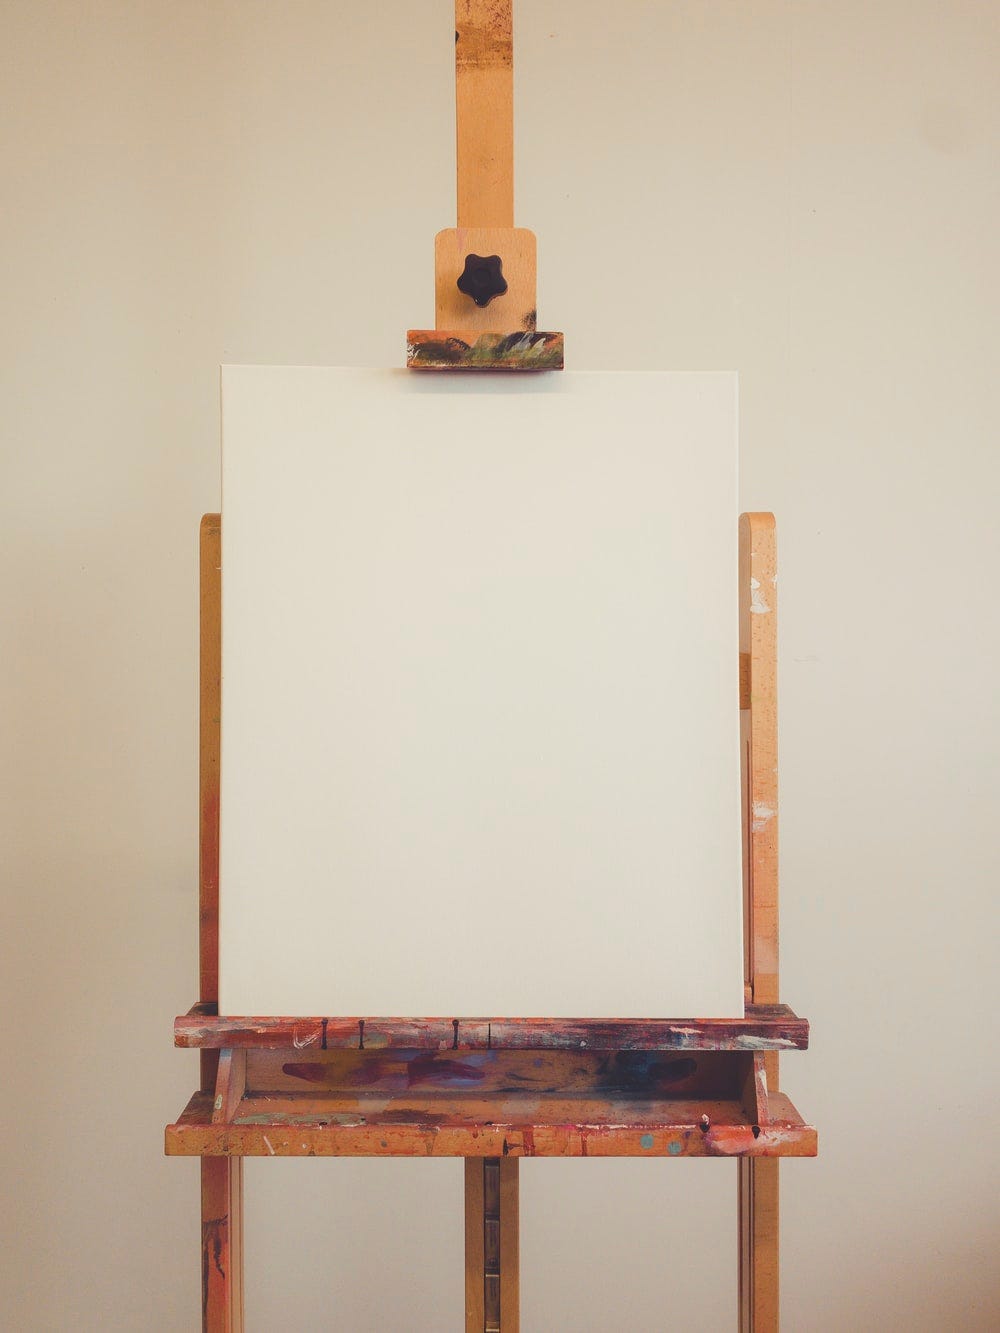 A photo of a blank canvas